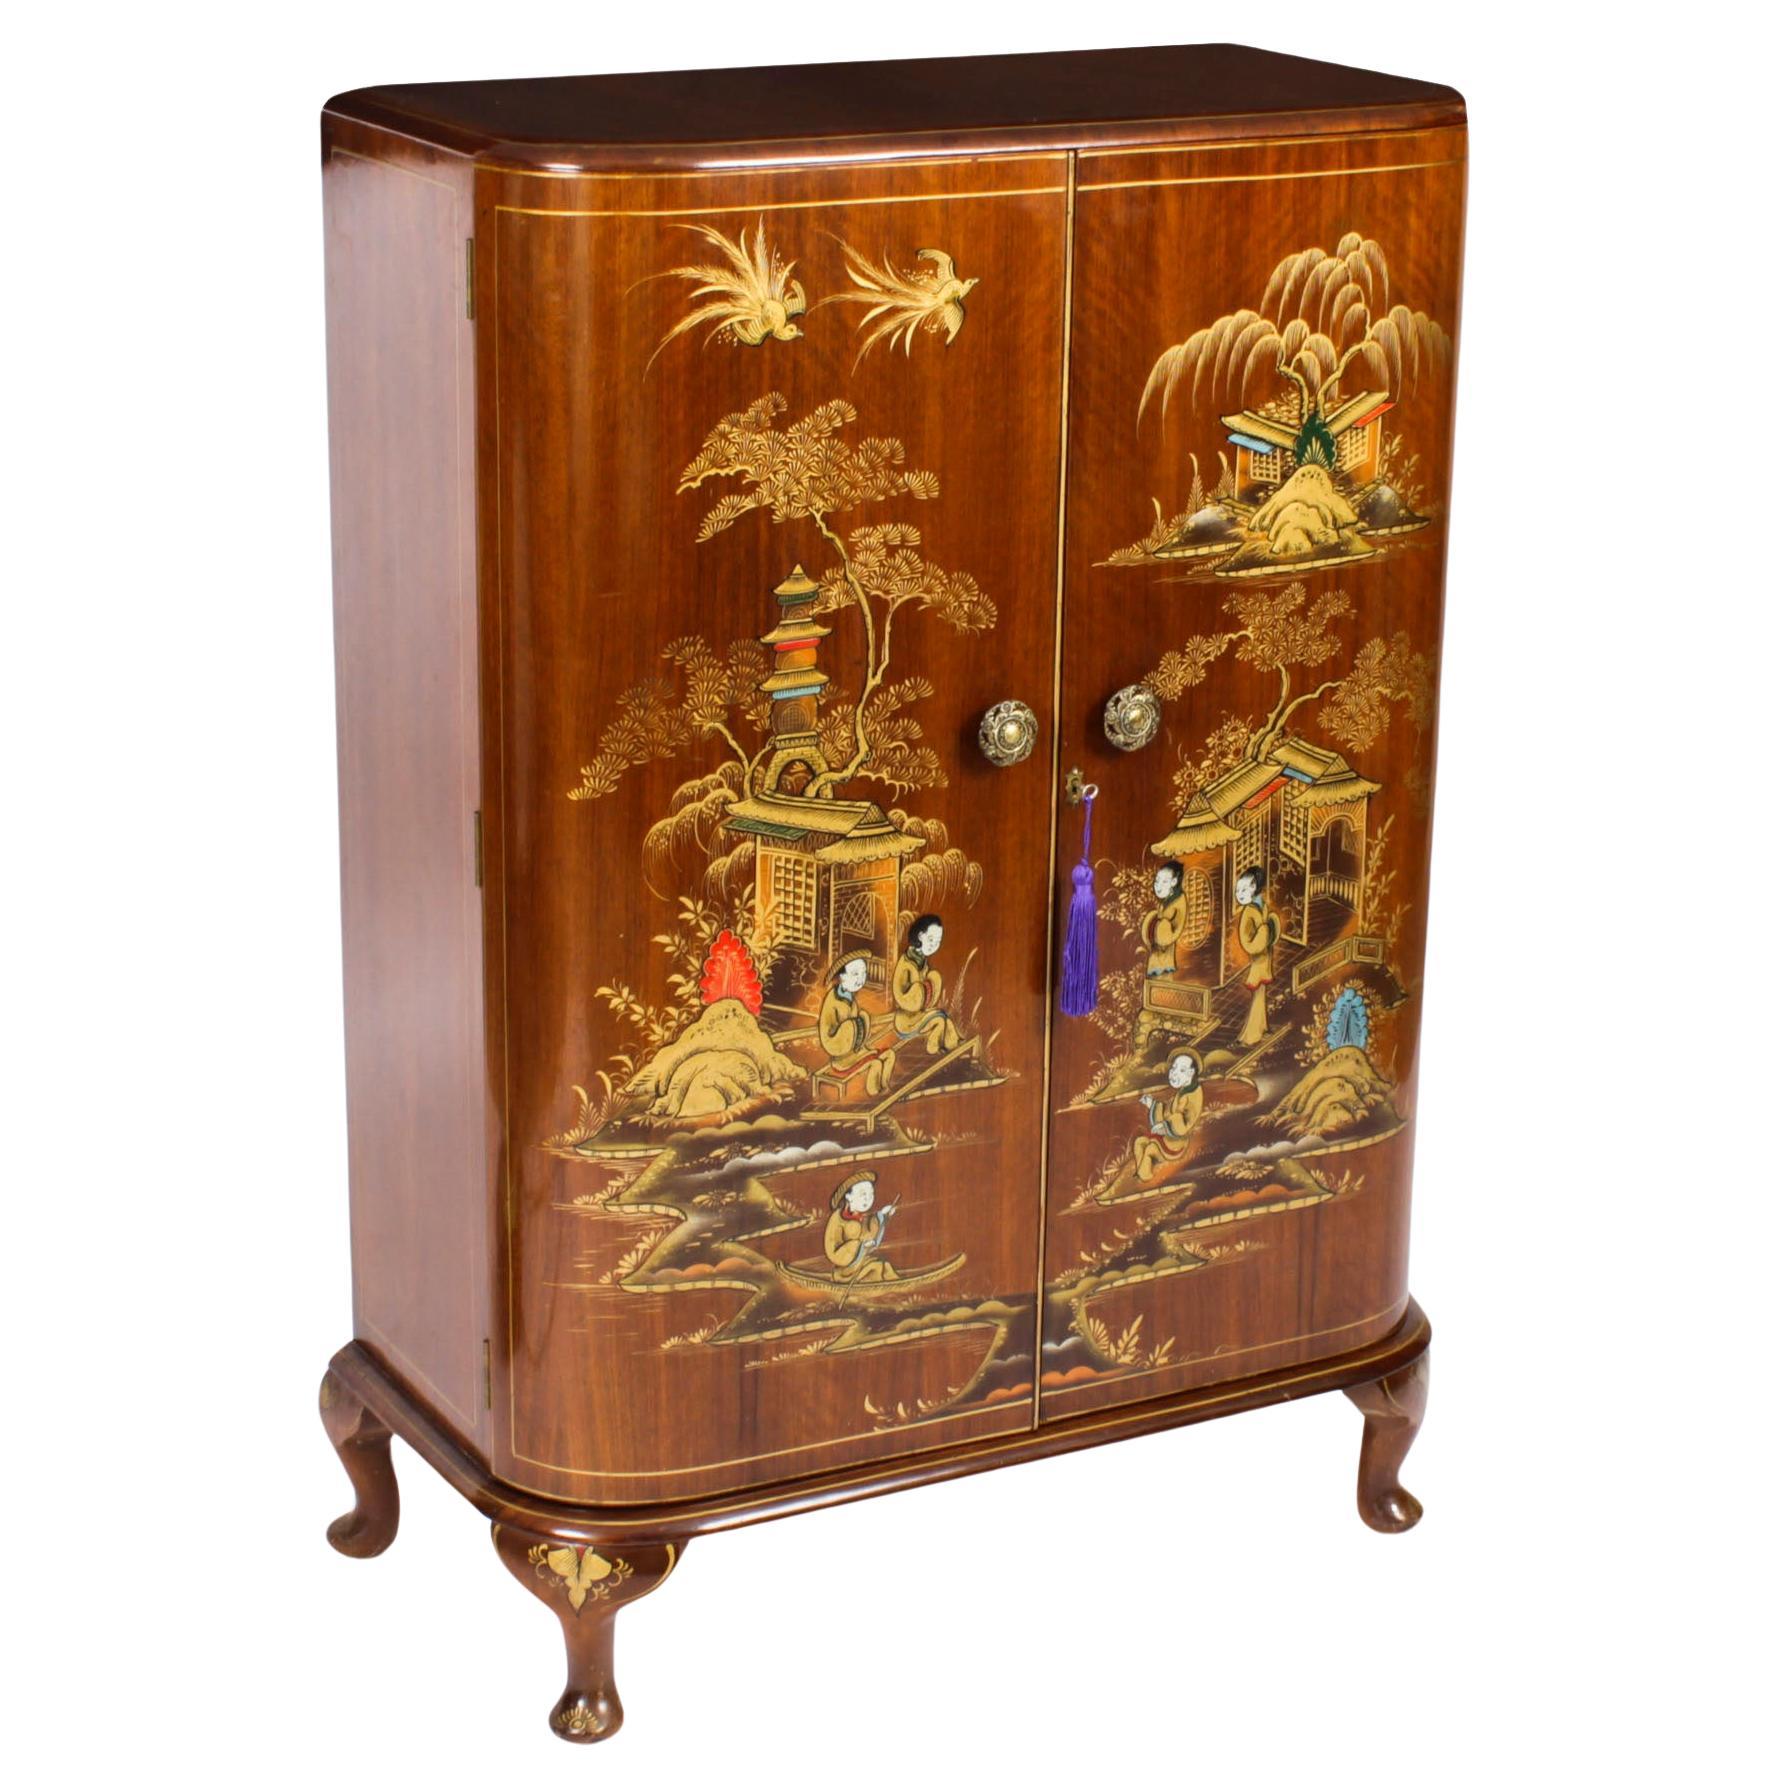 Antique Art Deco Chinoiserie Cocktail Cabinet Dry Bar Harrods Early 20th Century